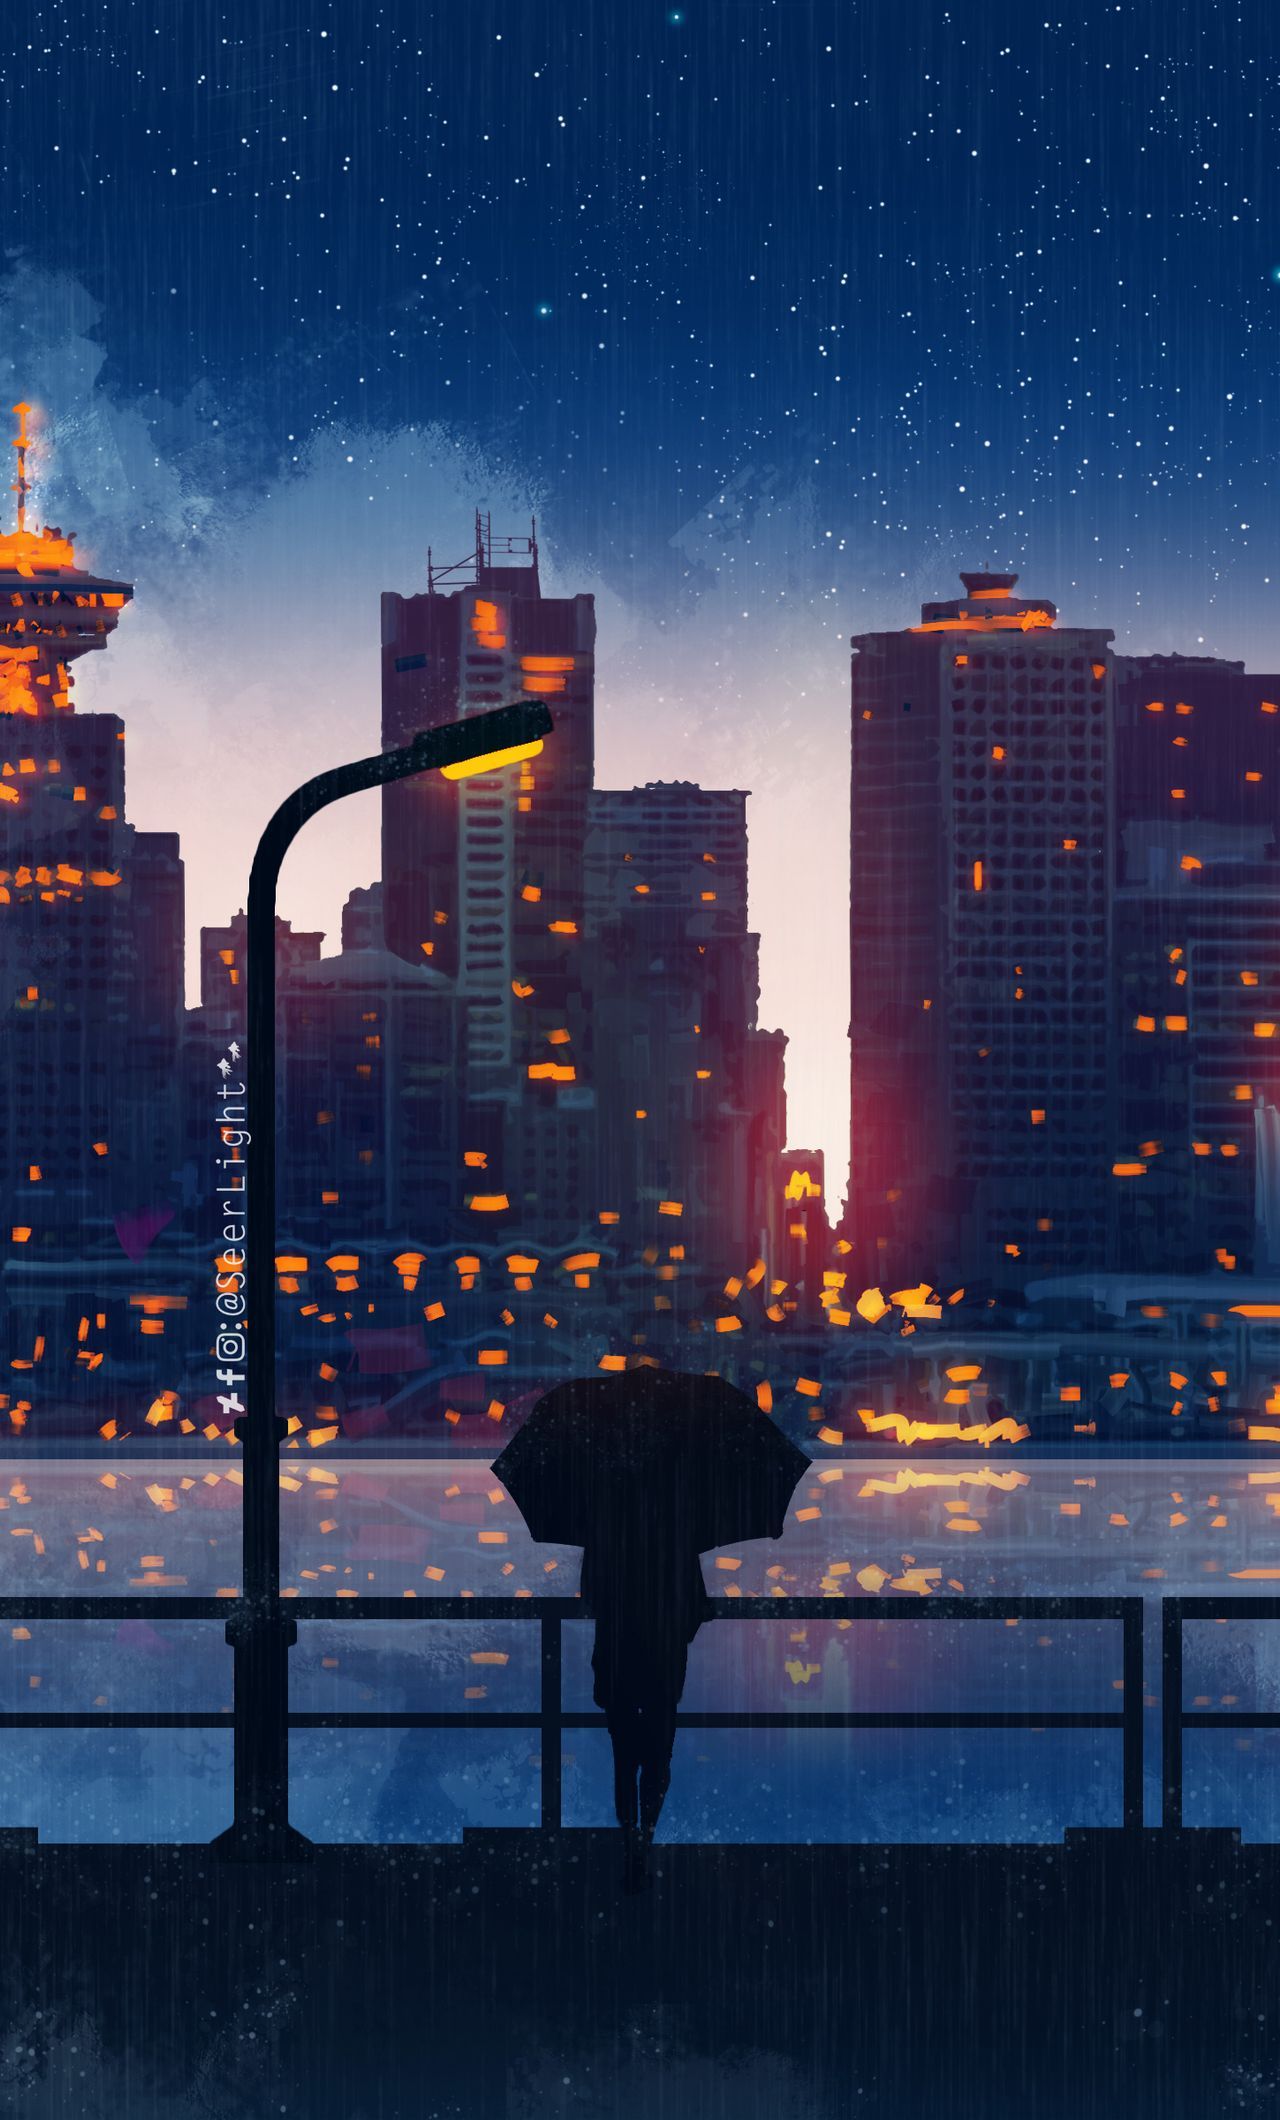 A person standing on the sidewalk looking at city lights - Anime city